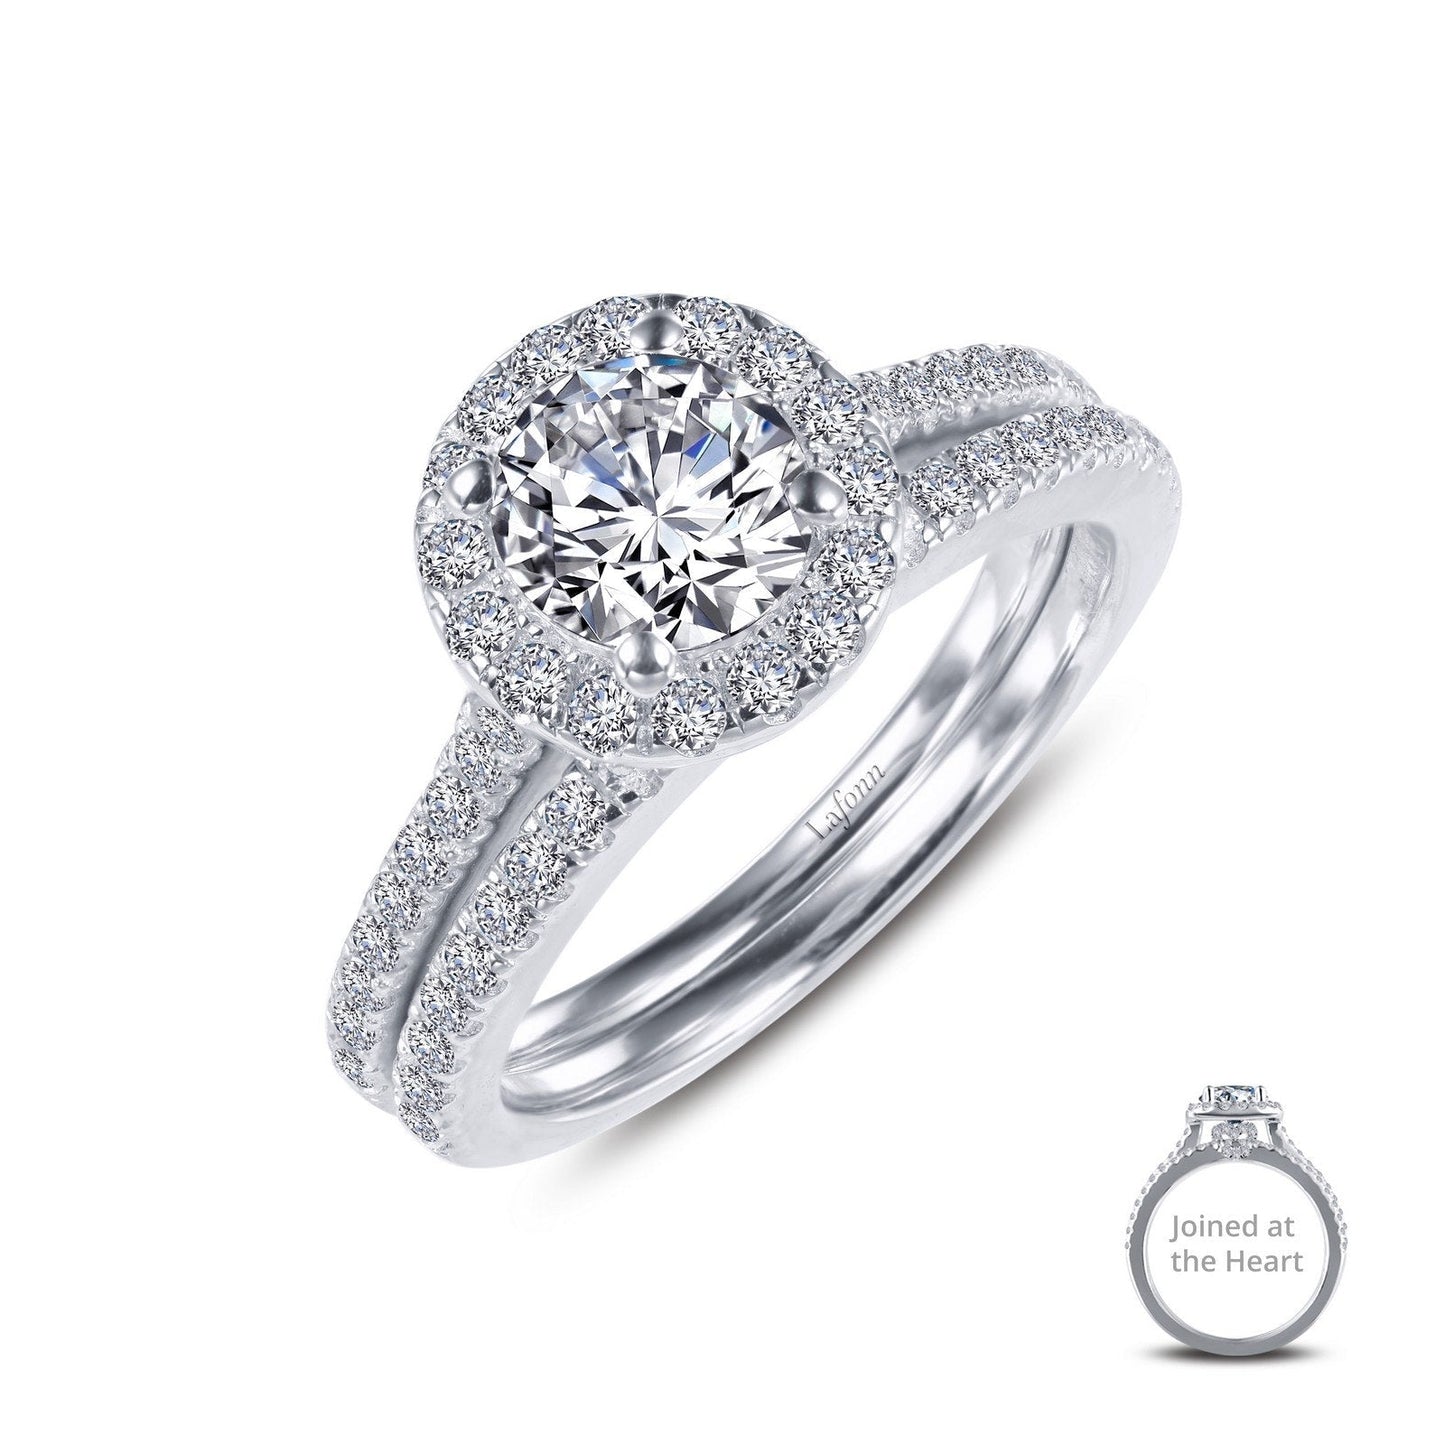 Lafonn Joined-At-The-Heart Wedding Set Simulated Diamond RINGS Size 7 Platinum 1.72 CTS 